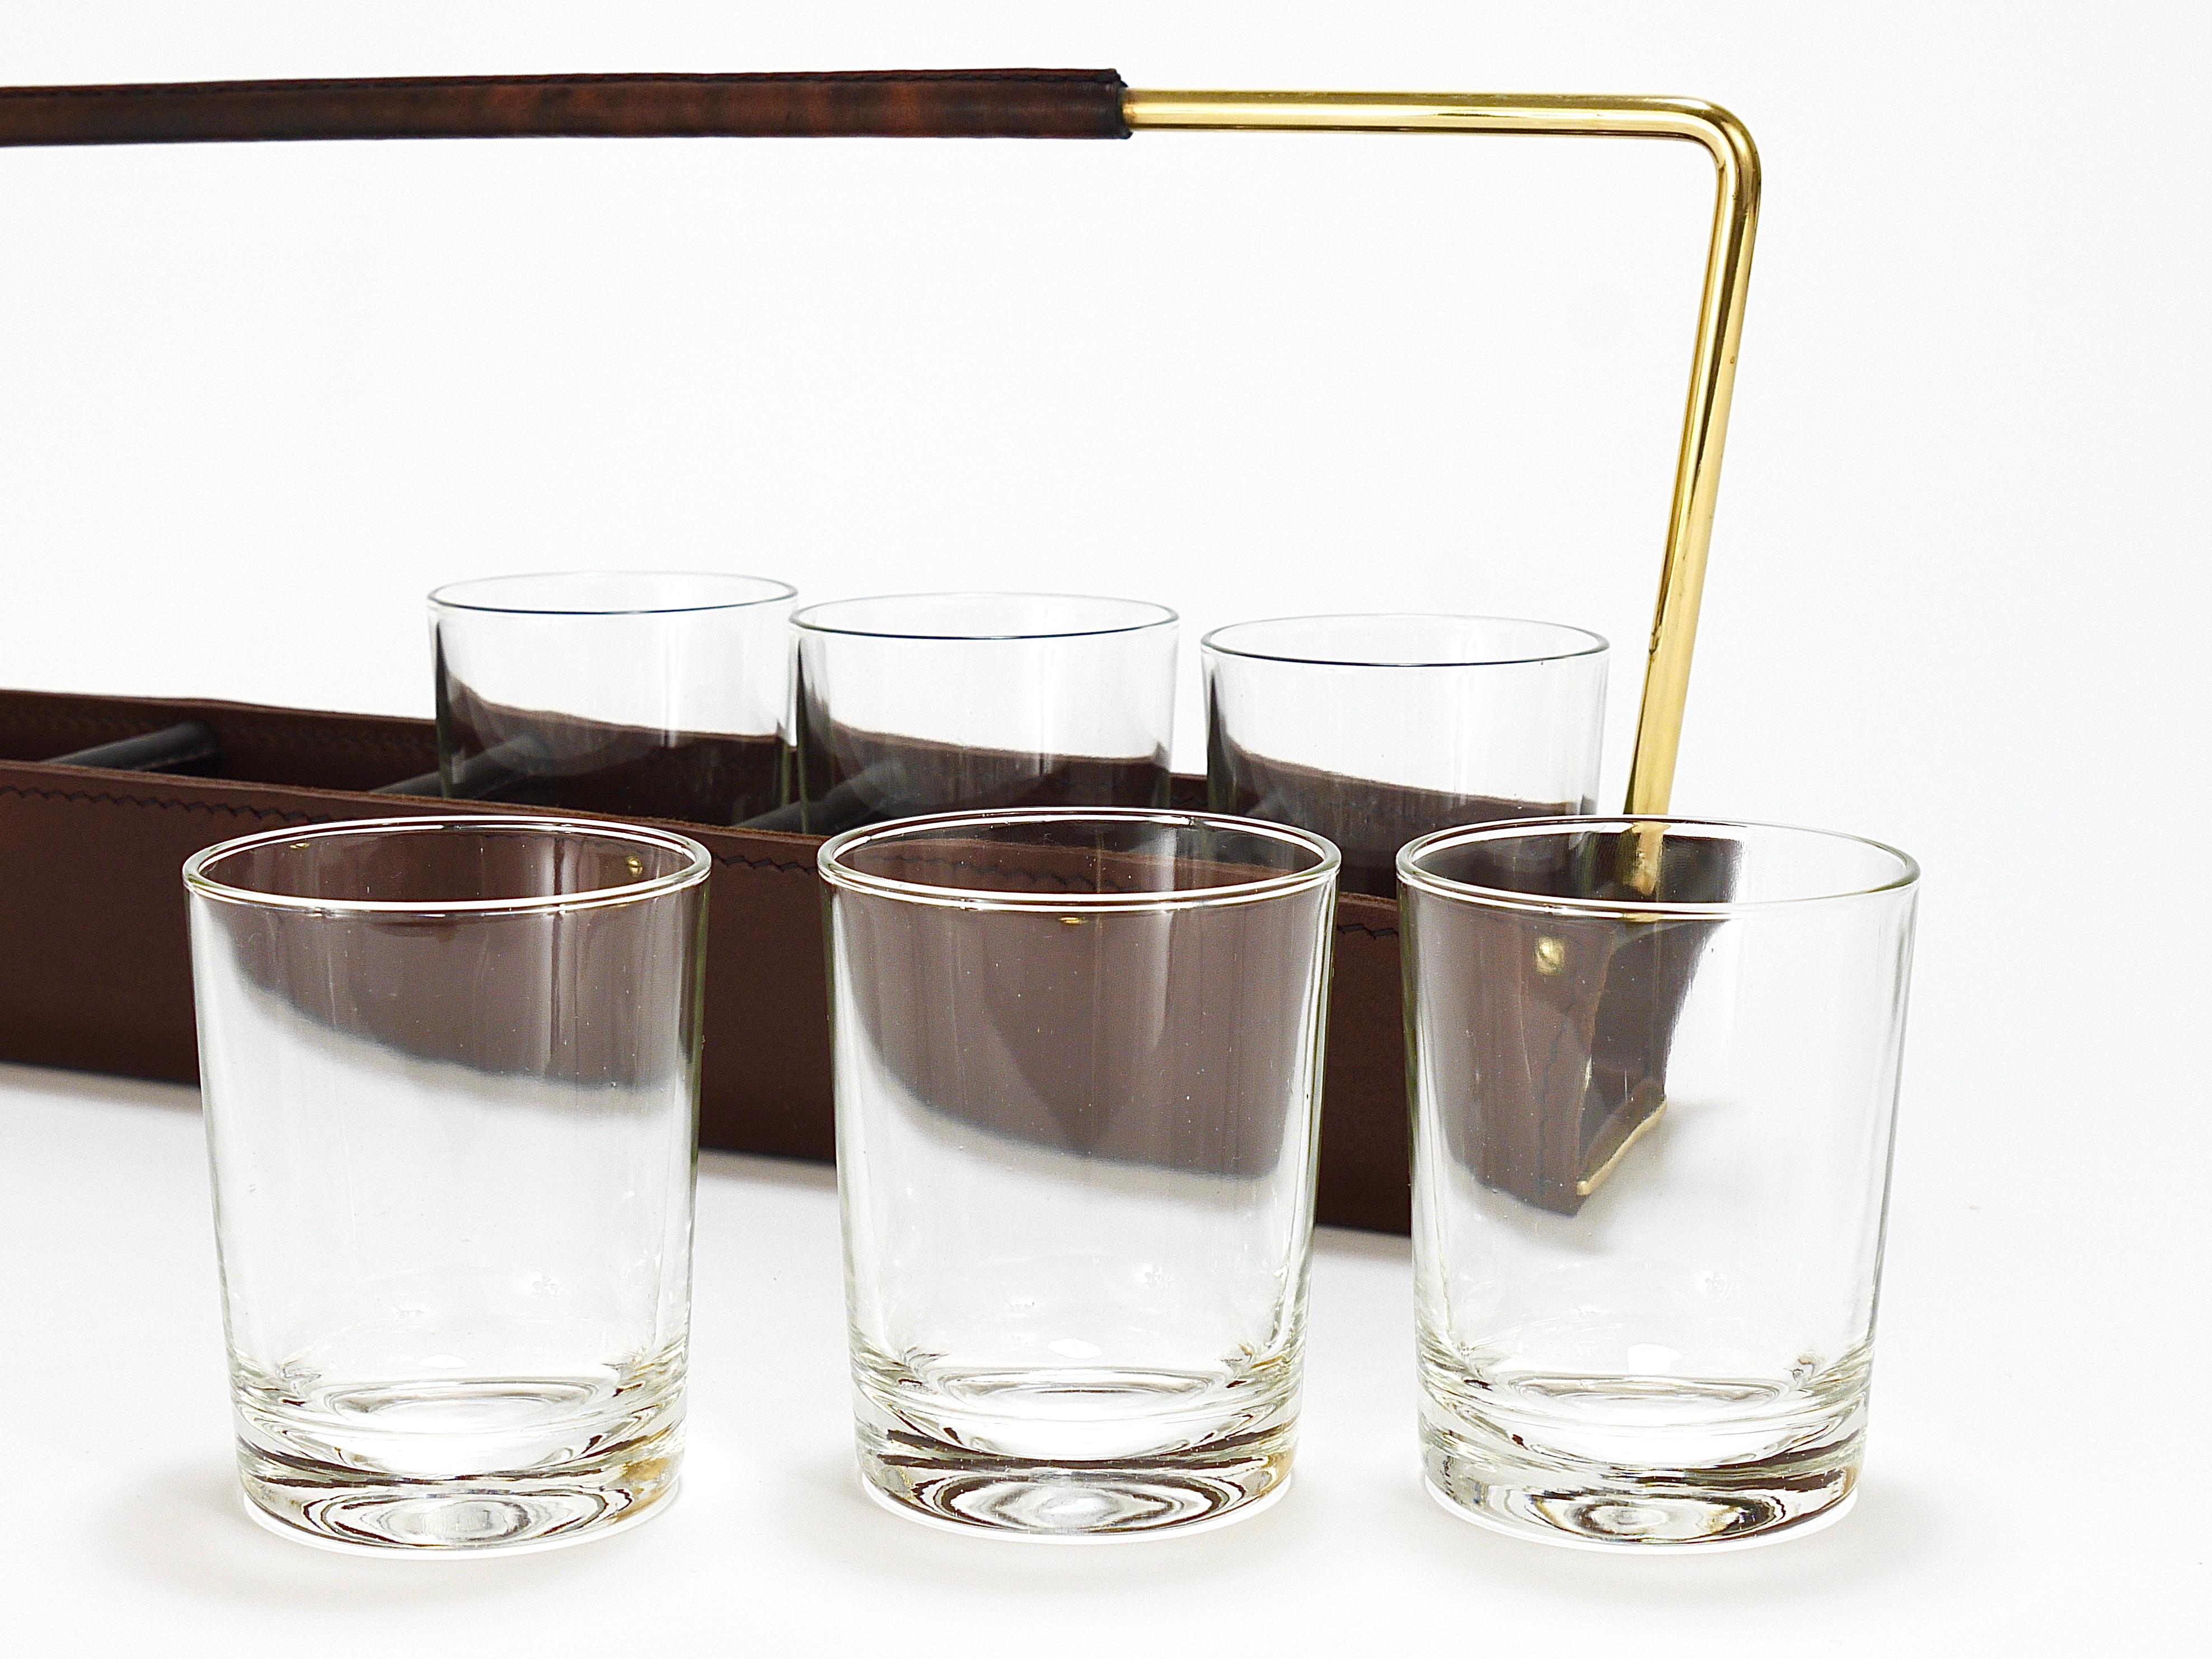 Carl Auböck II Drinking Glass Carrying Rack, Leather & Brass, Austria 1950s For Sale 1